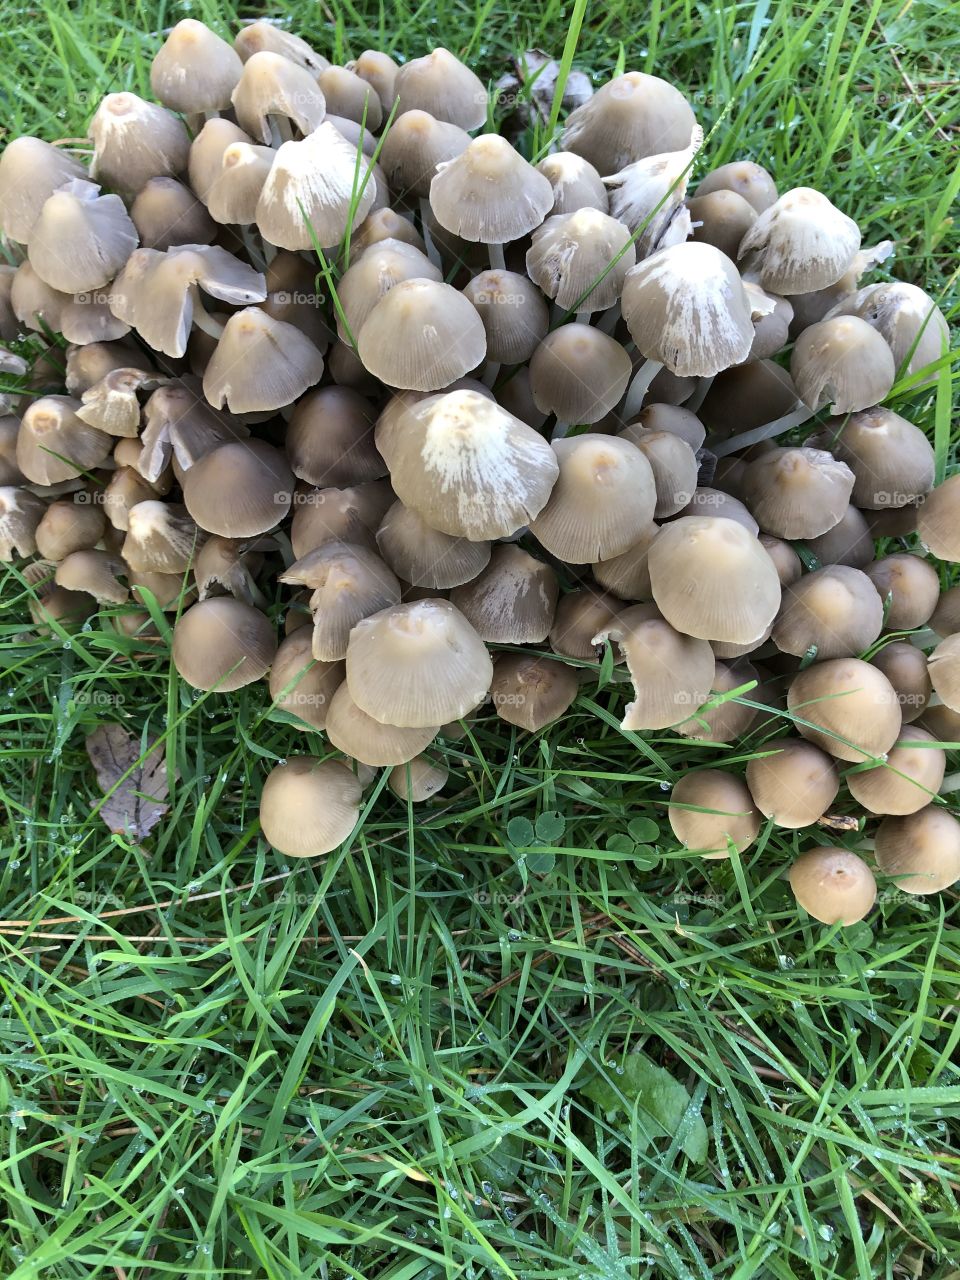 A group of wiled mushrooms 